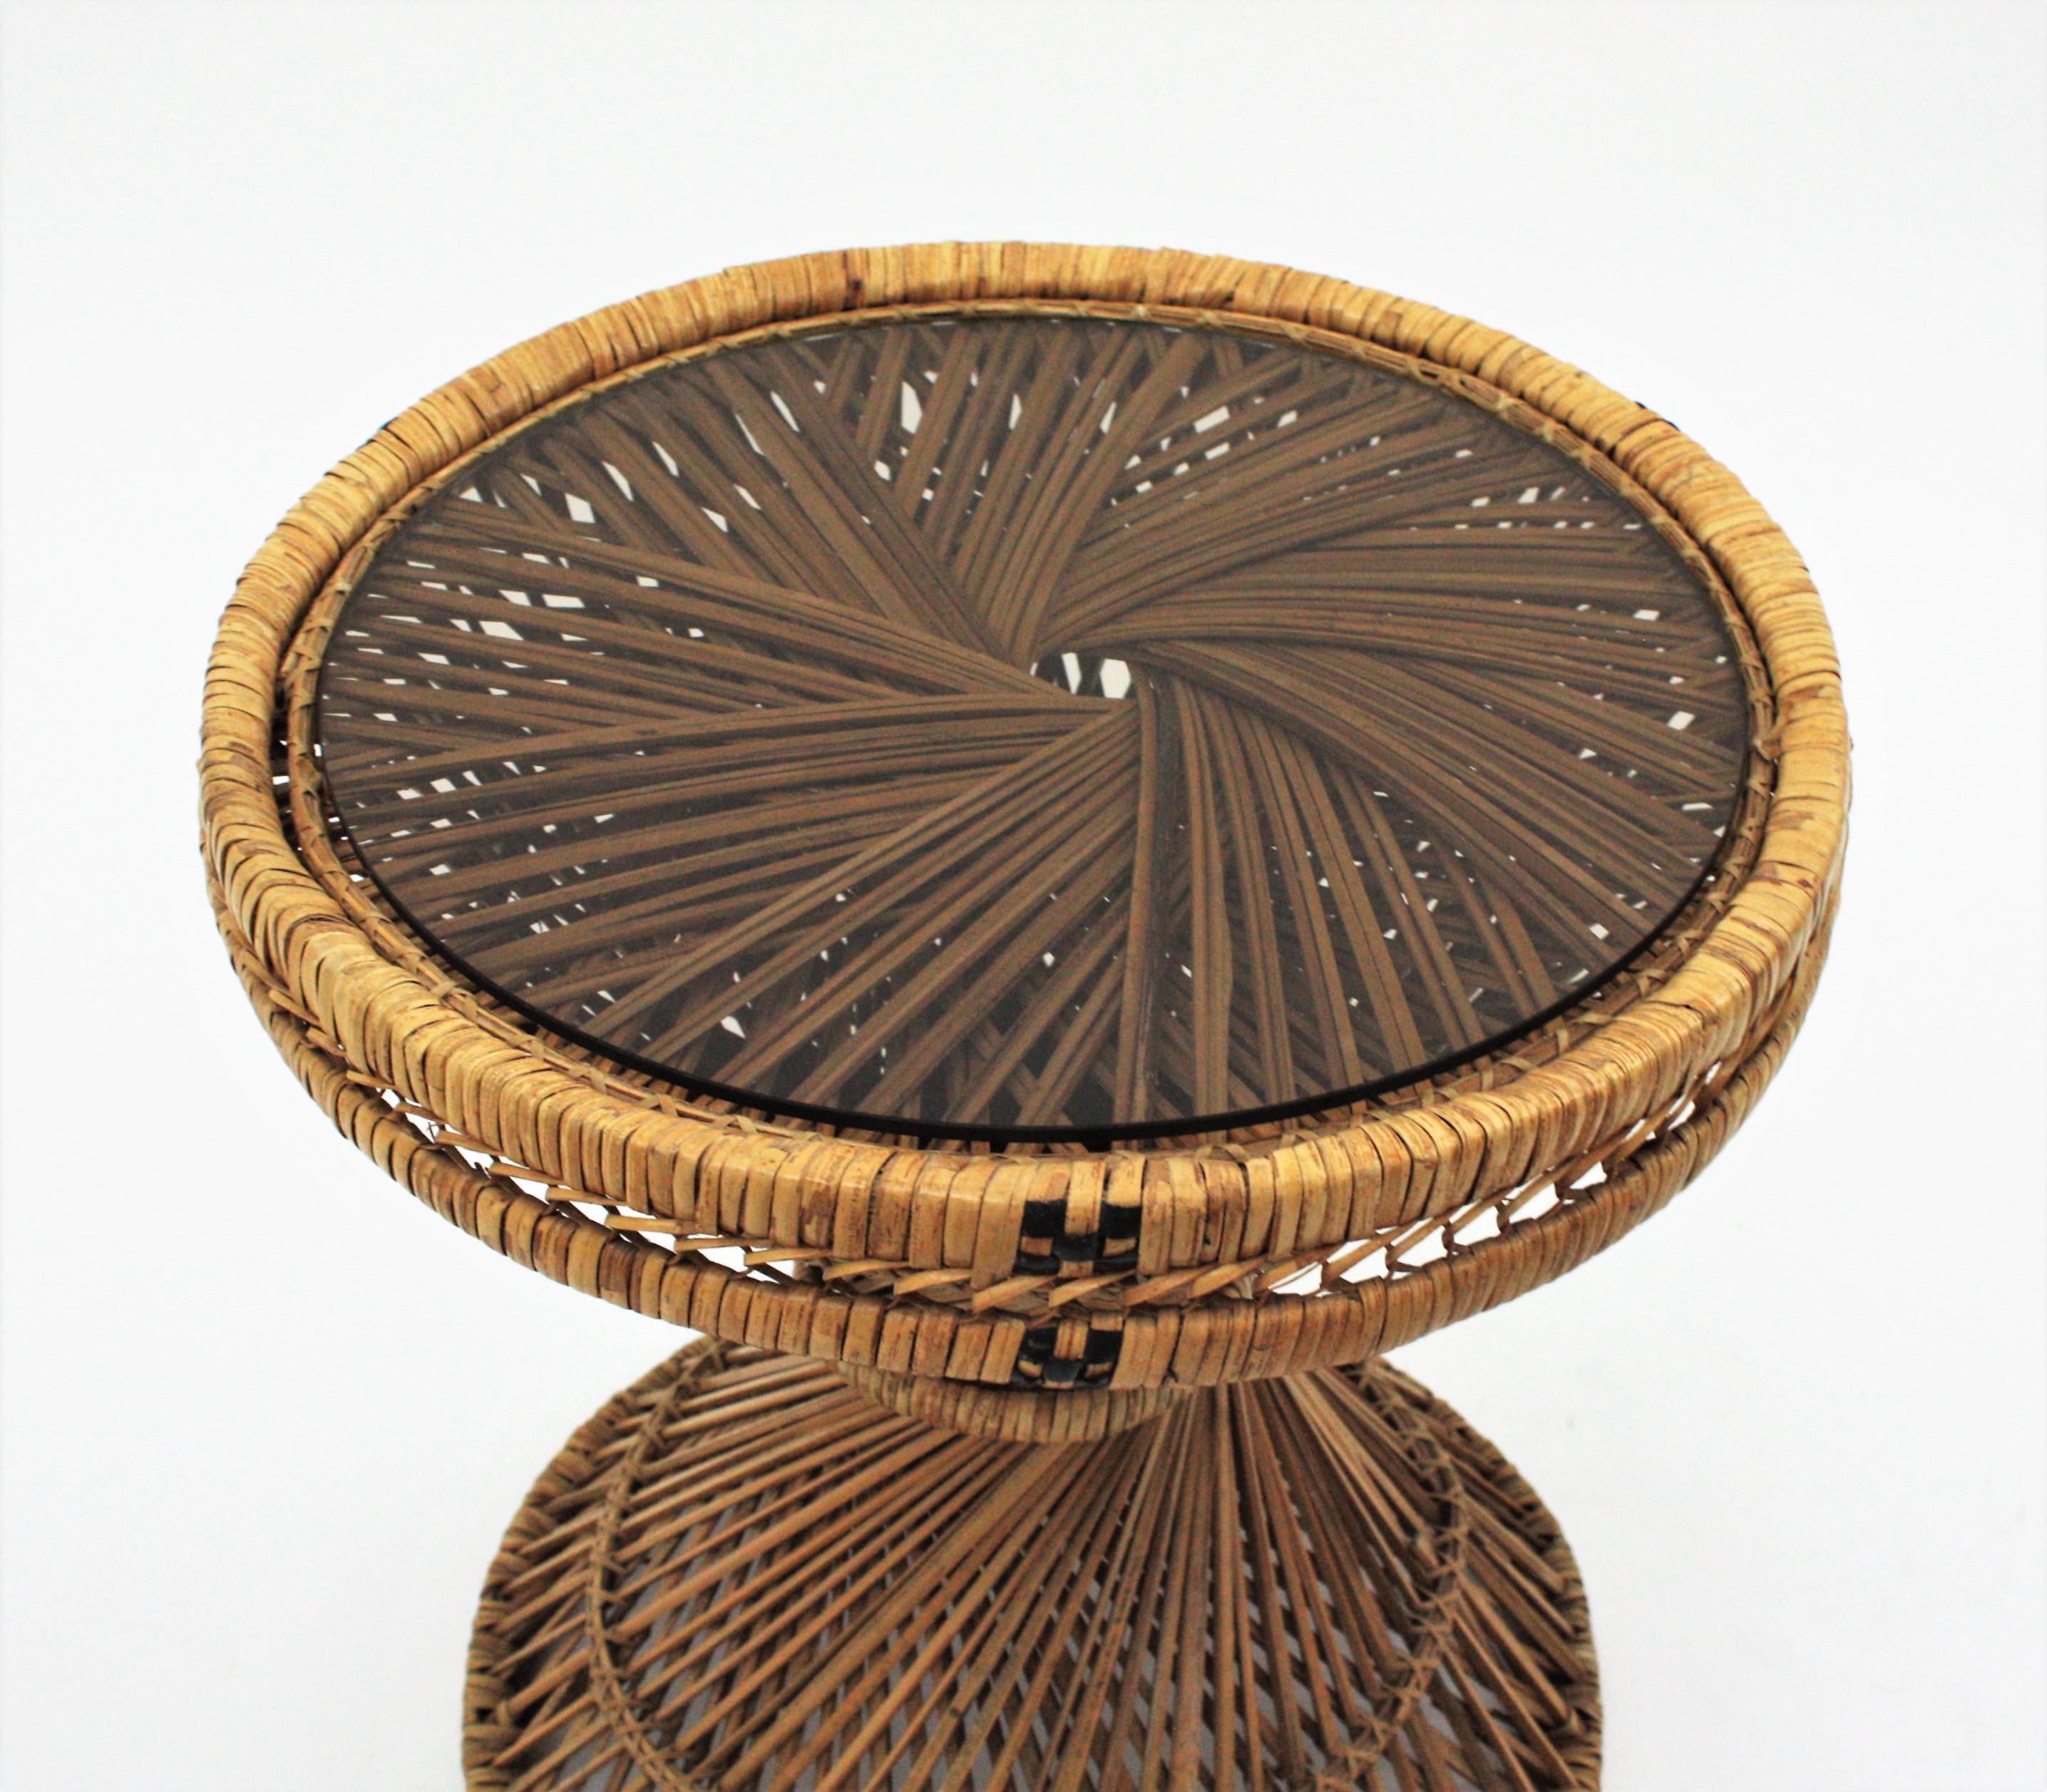 20th Century Woven Wicker Rattan Emmanuelle Peacock Small Coffee Table, Spain, 1960s For Sale